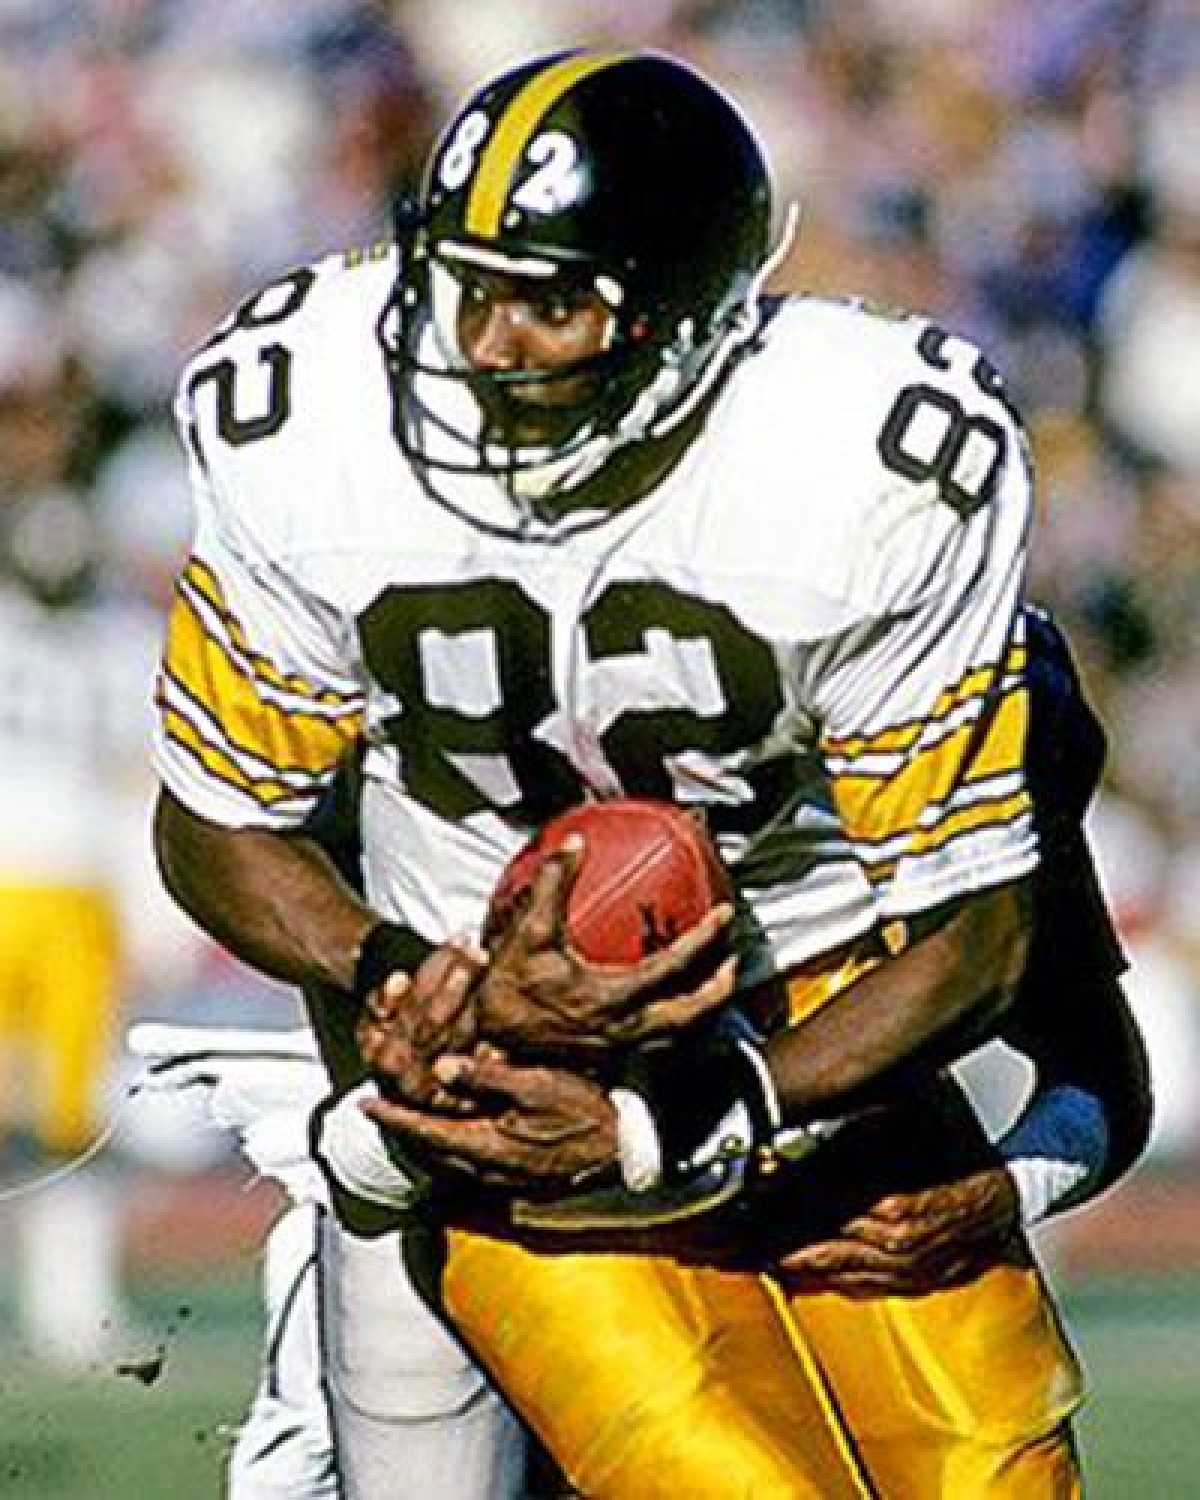 Not in Hall of Fame - 16. John Stallworth